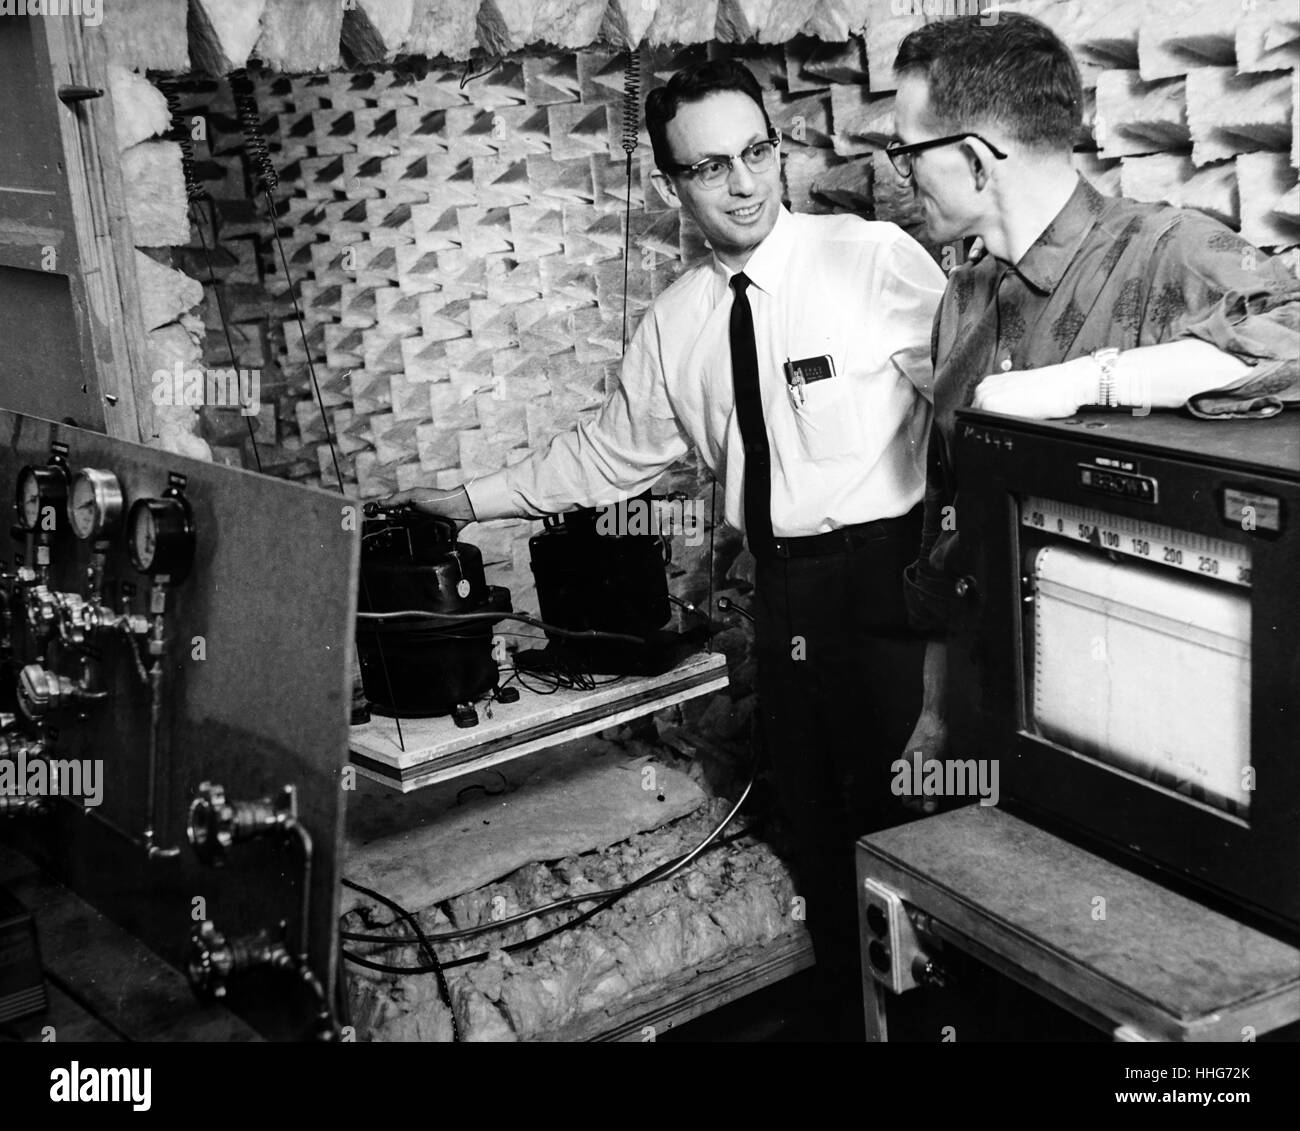 Tracing sources of refrigerator noise; Prof. Raymond Cohen and graduate student Paul Ukrainetz place two compressors (cooling units) inside the anechoic chamber. Recording device at right marks temperatures of the compressors. Stock Photo